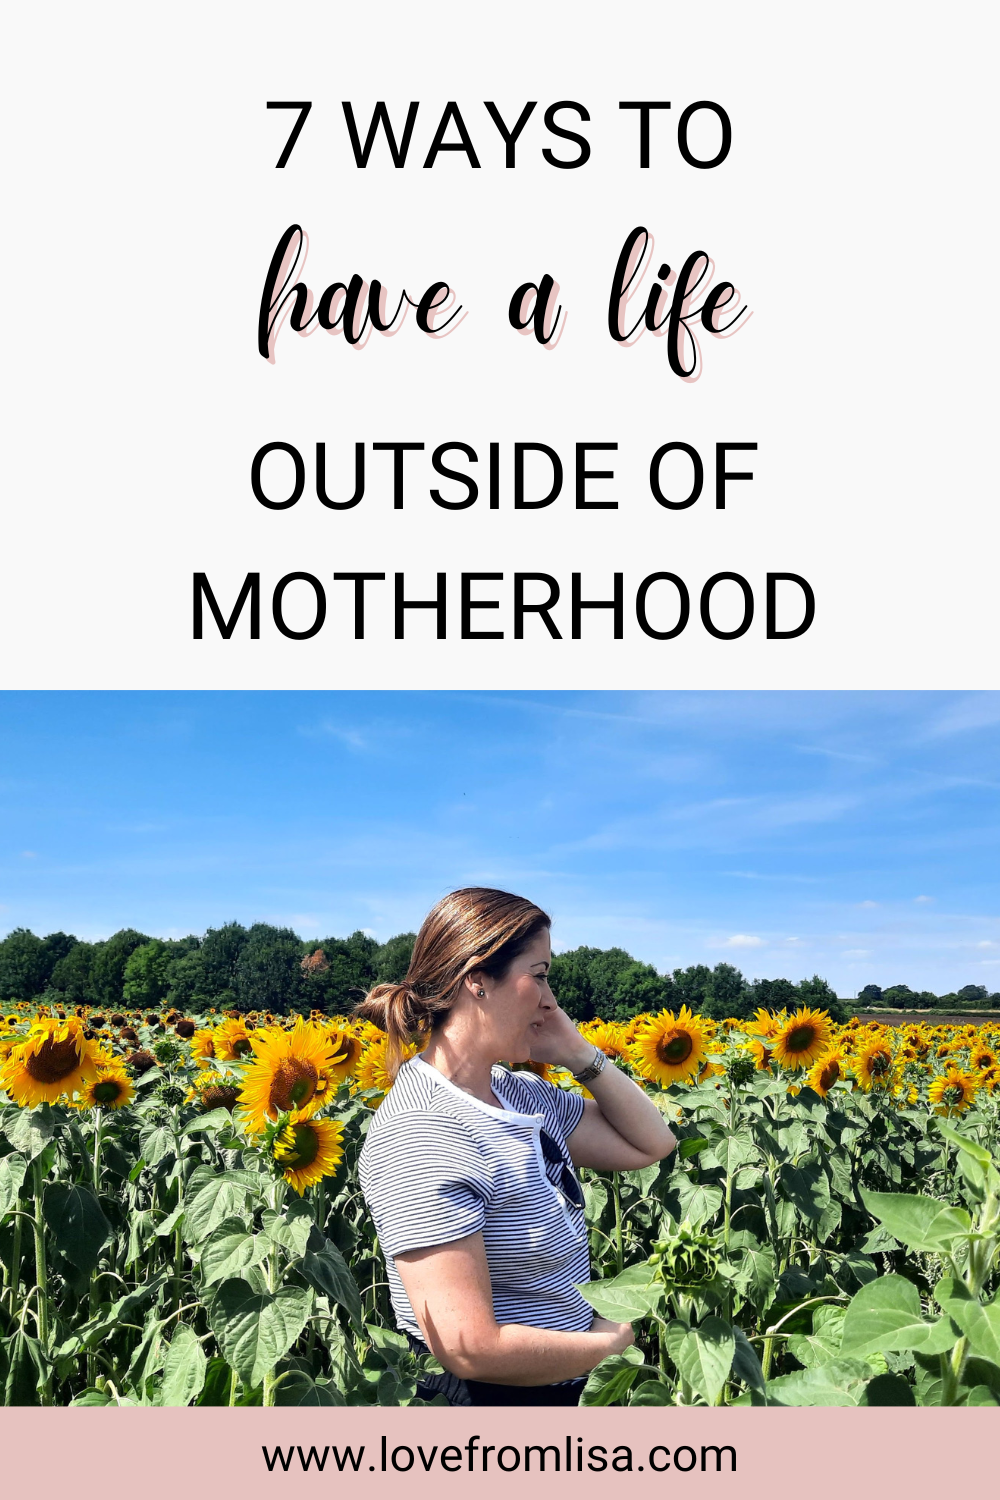 7 ways to have life outside of motherhood so mums can find an identity outside of being a mum, including ways to make time for yourself as a mum a priority.